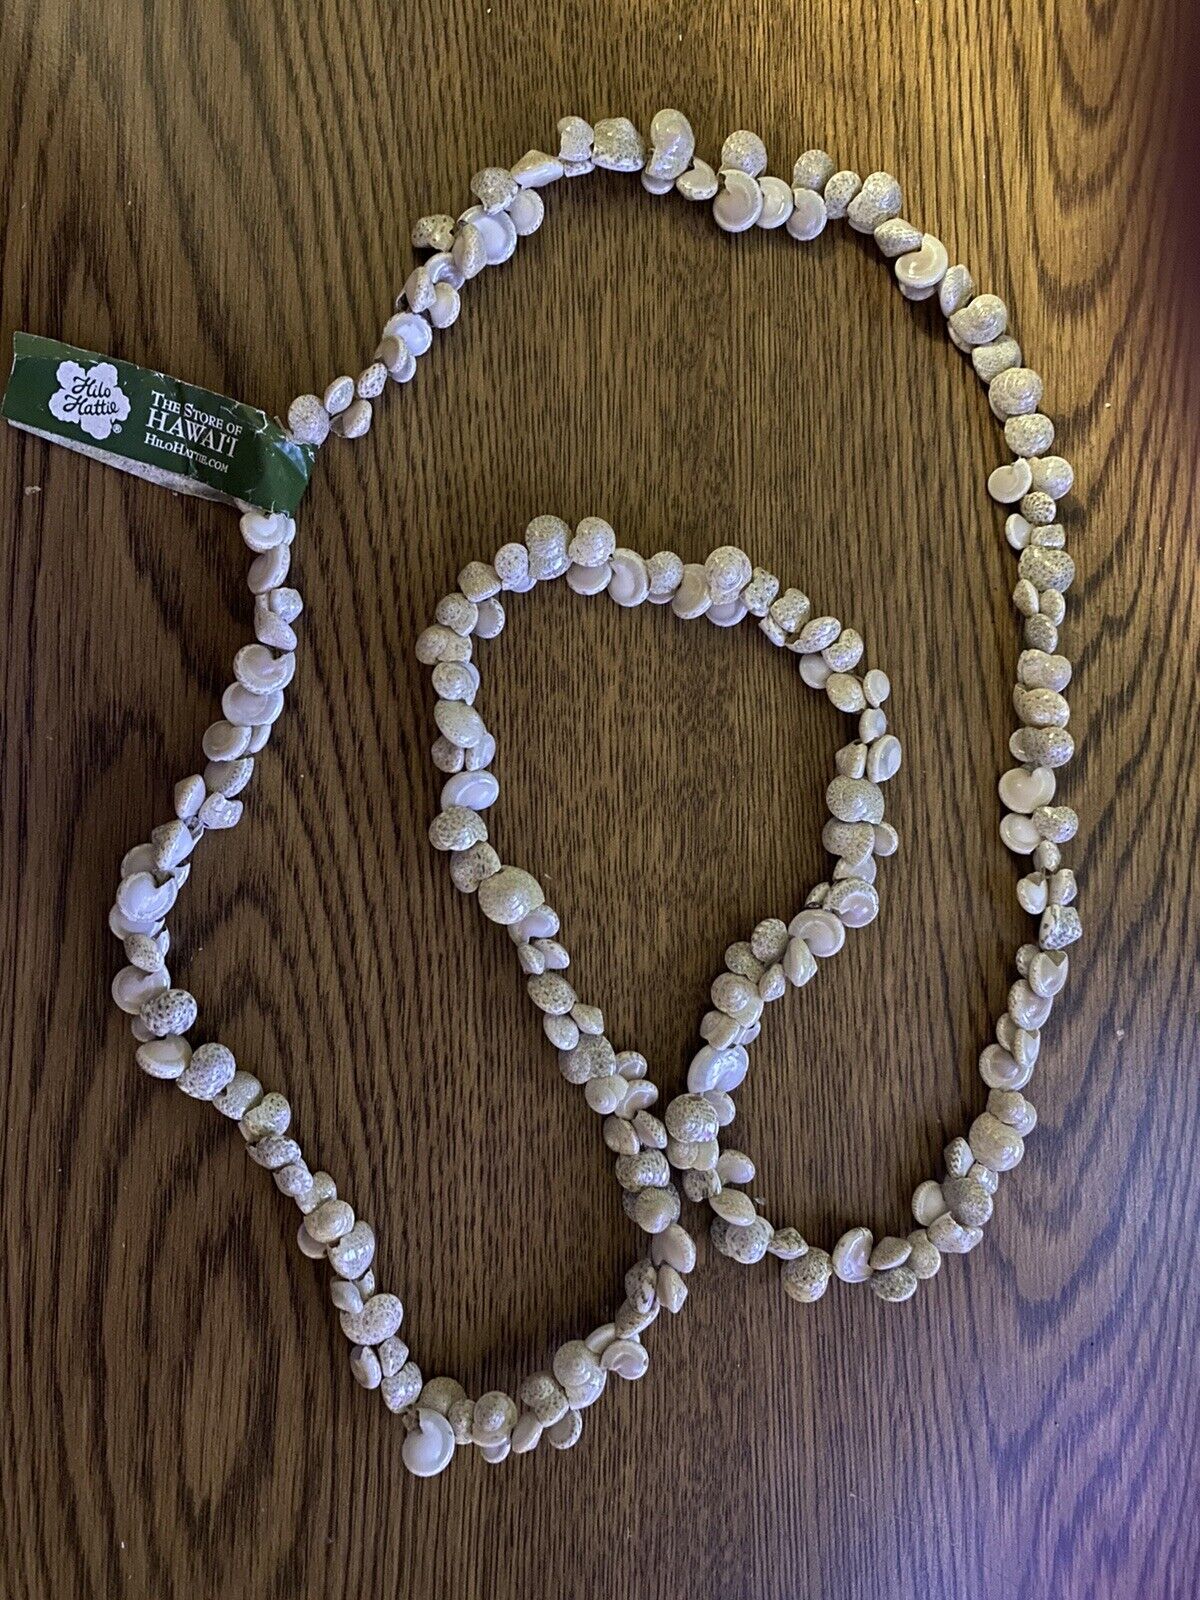 Hilo Hattie\'s Hawaiian Shell Necklace with Label 18” Long Excellent Condition